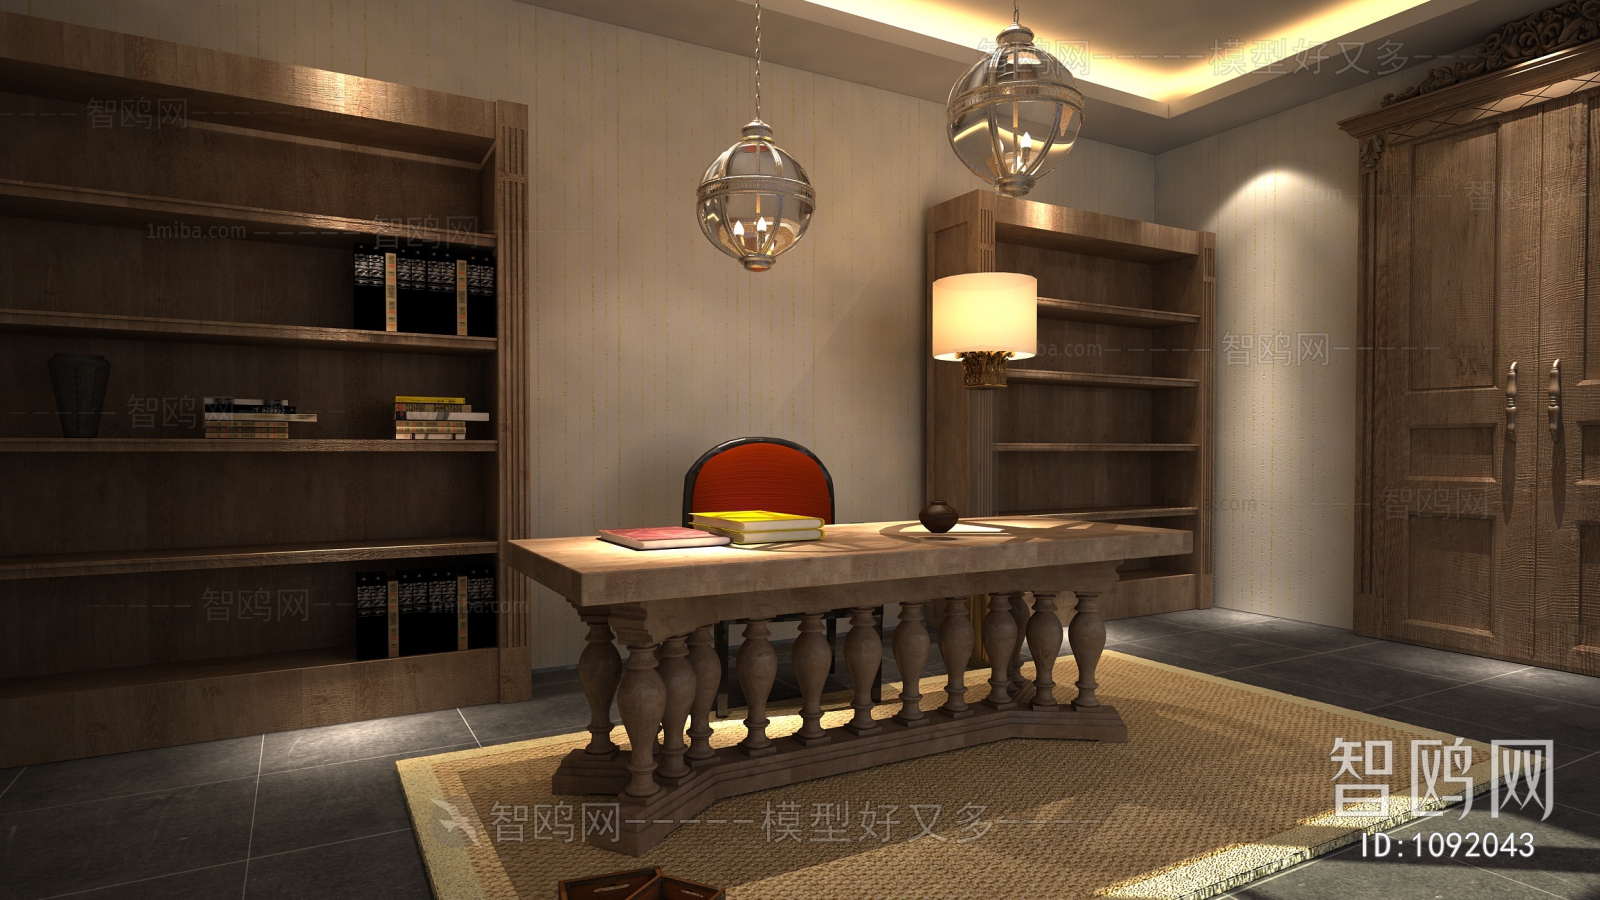 Chinese Style Study Space